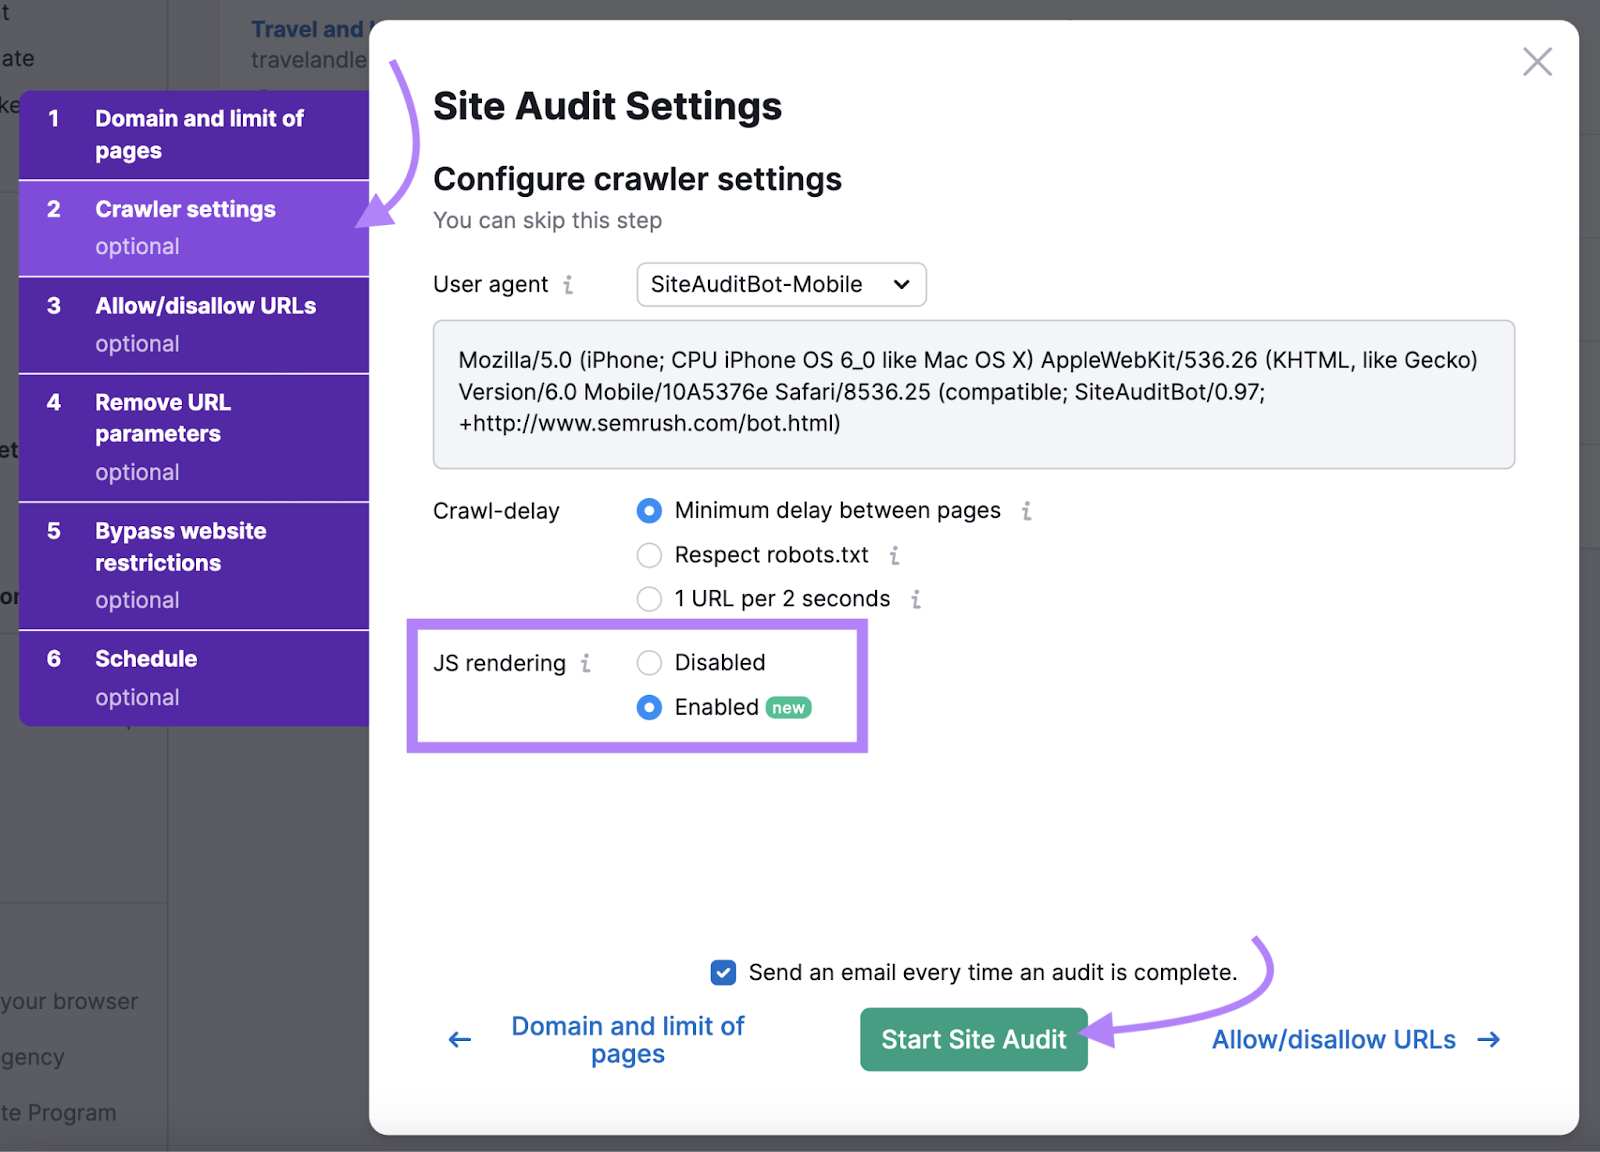 JS rendering section of site audit settings highlighted